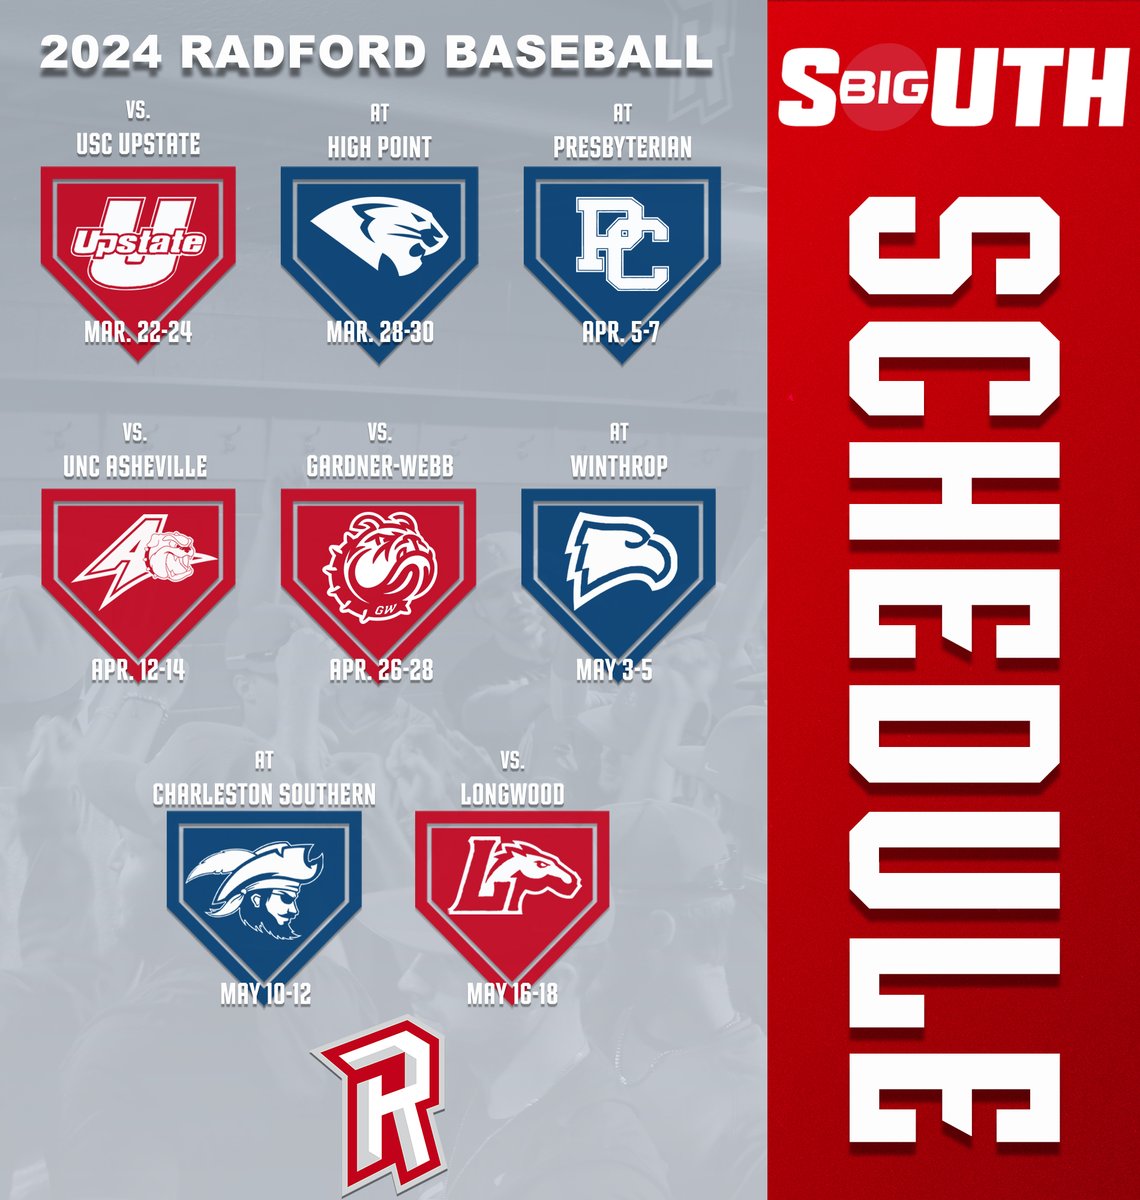 Mark your calendars! Our 2024 regular season schedule has finally arrived! See you in February! #RiseandDefend🛡 | #RWay